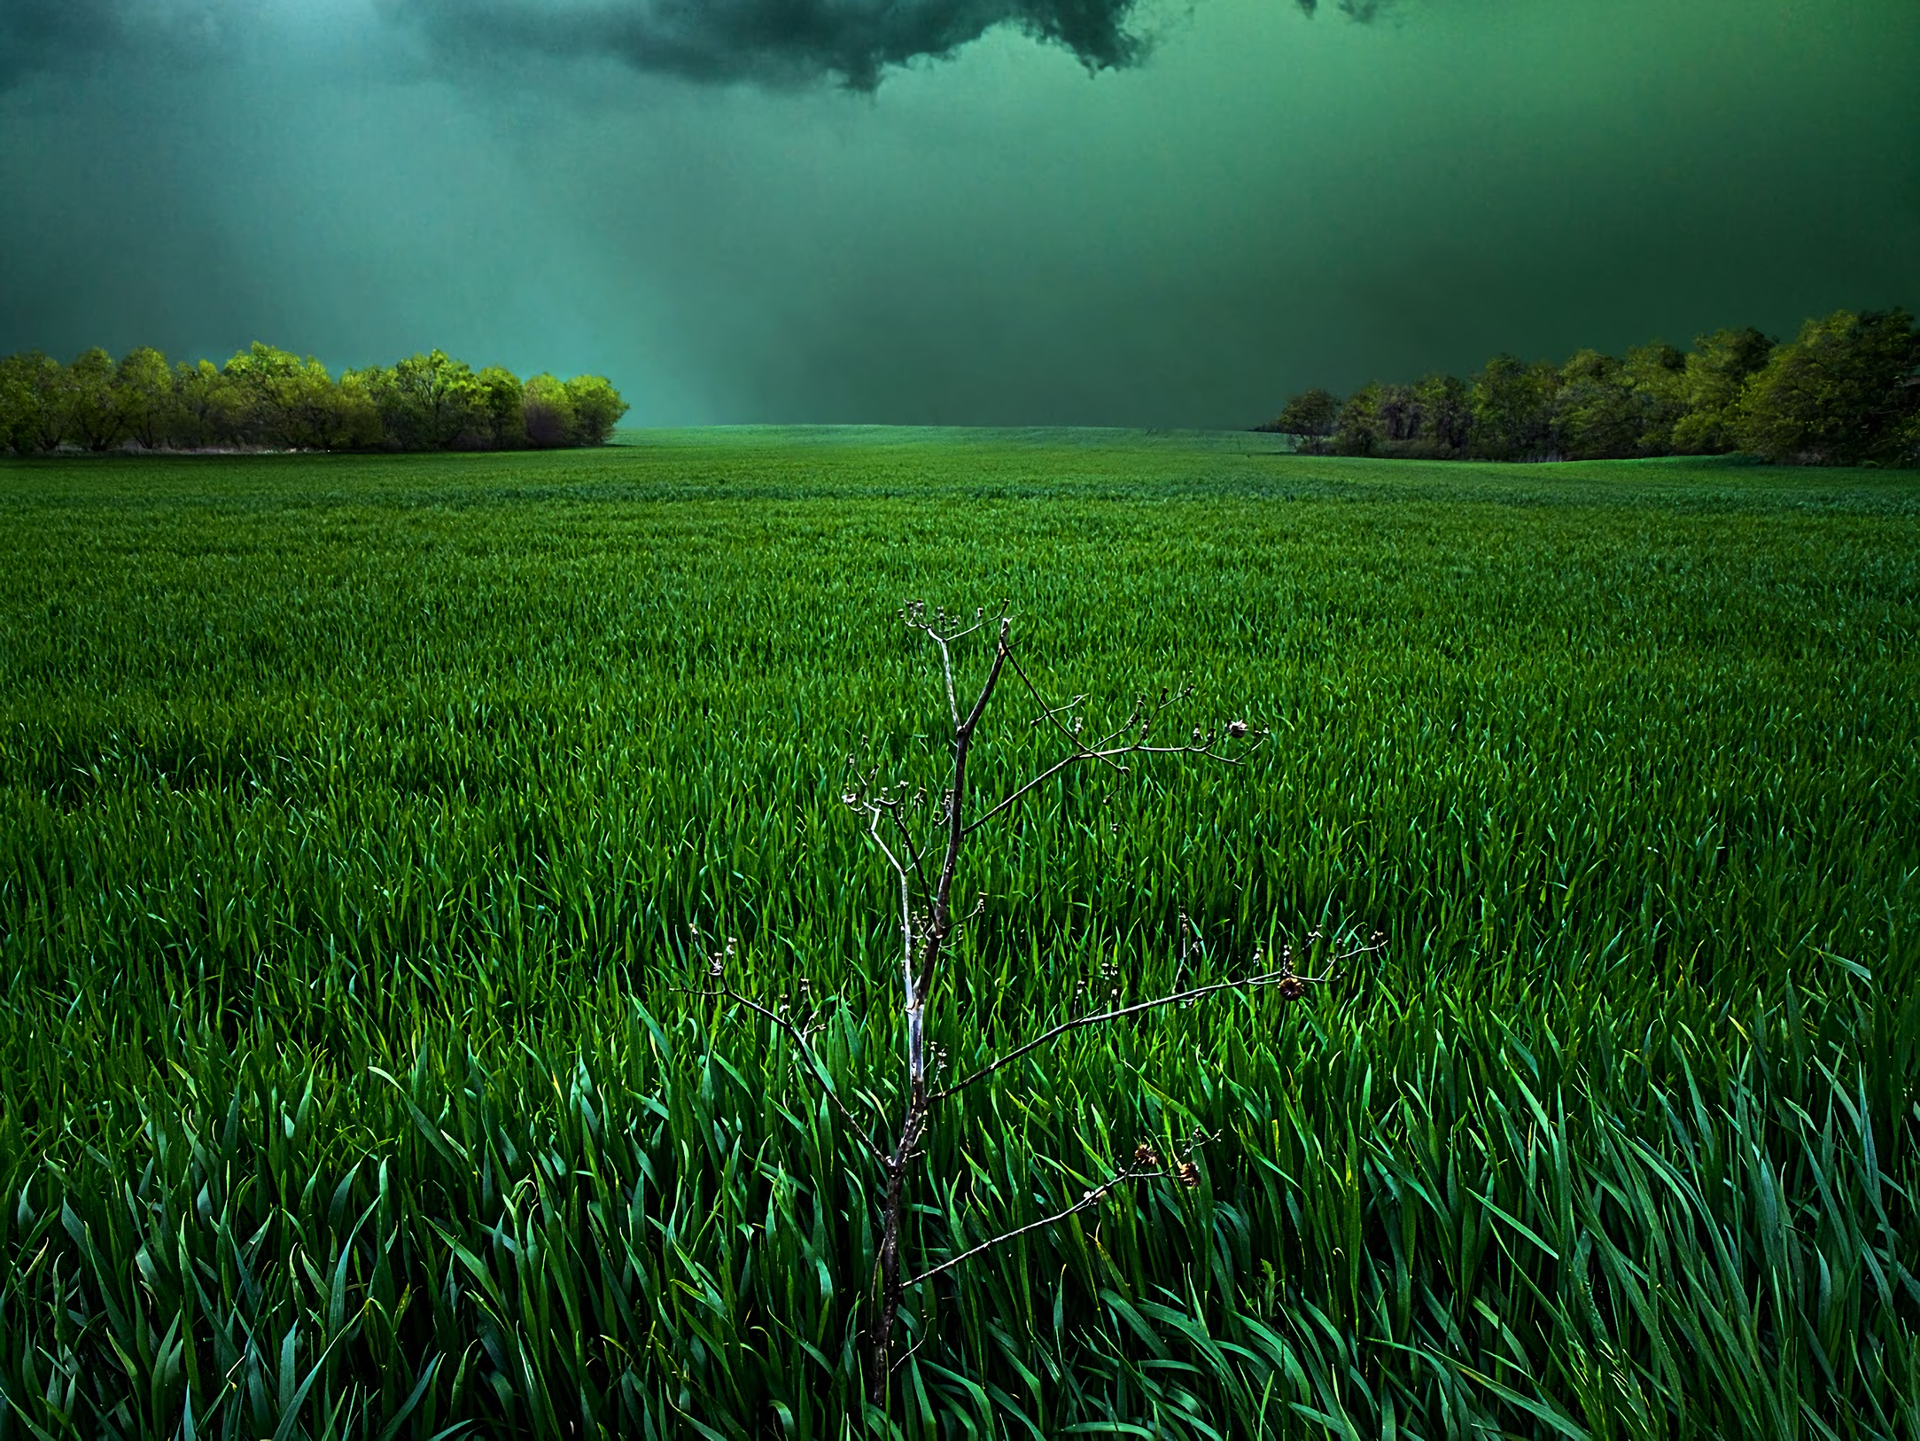 Stormy Sky over Grass Field HD Wallpaper. Background Image